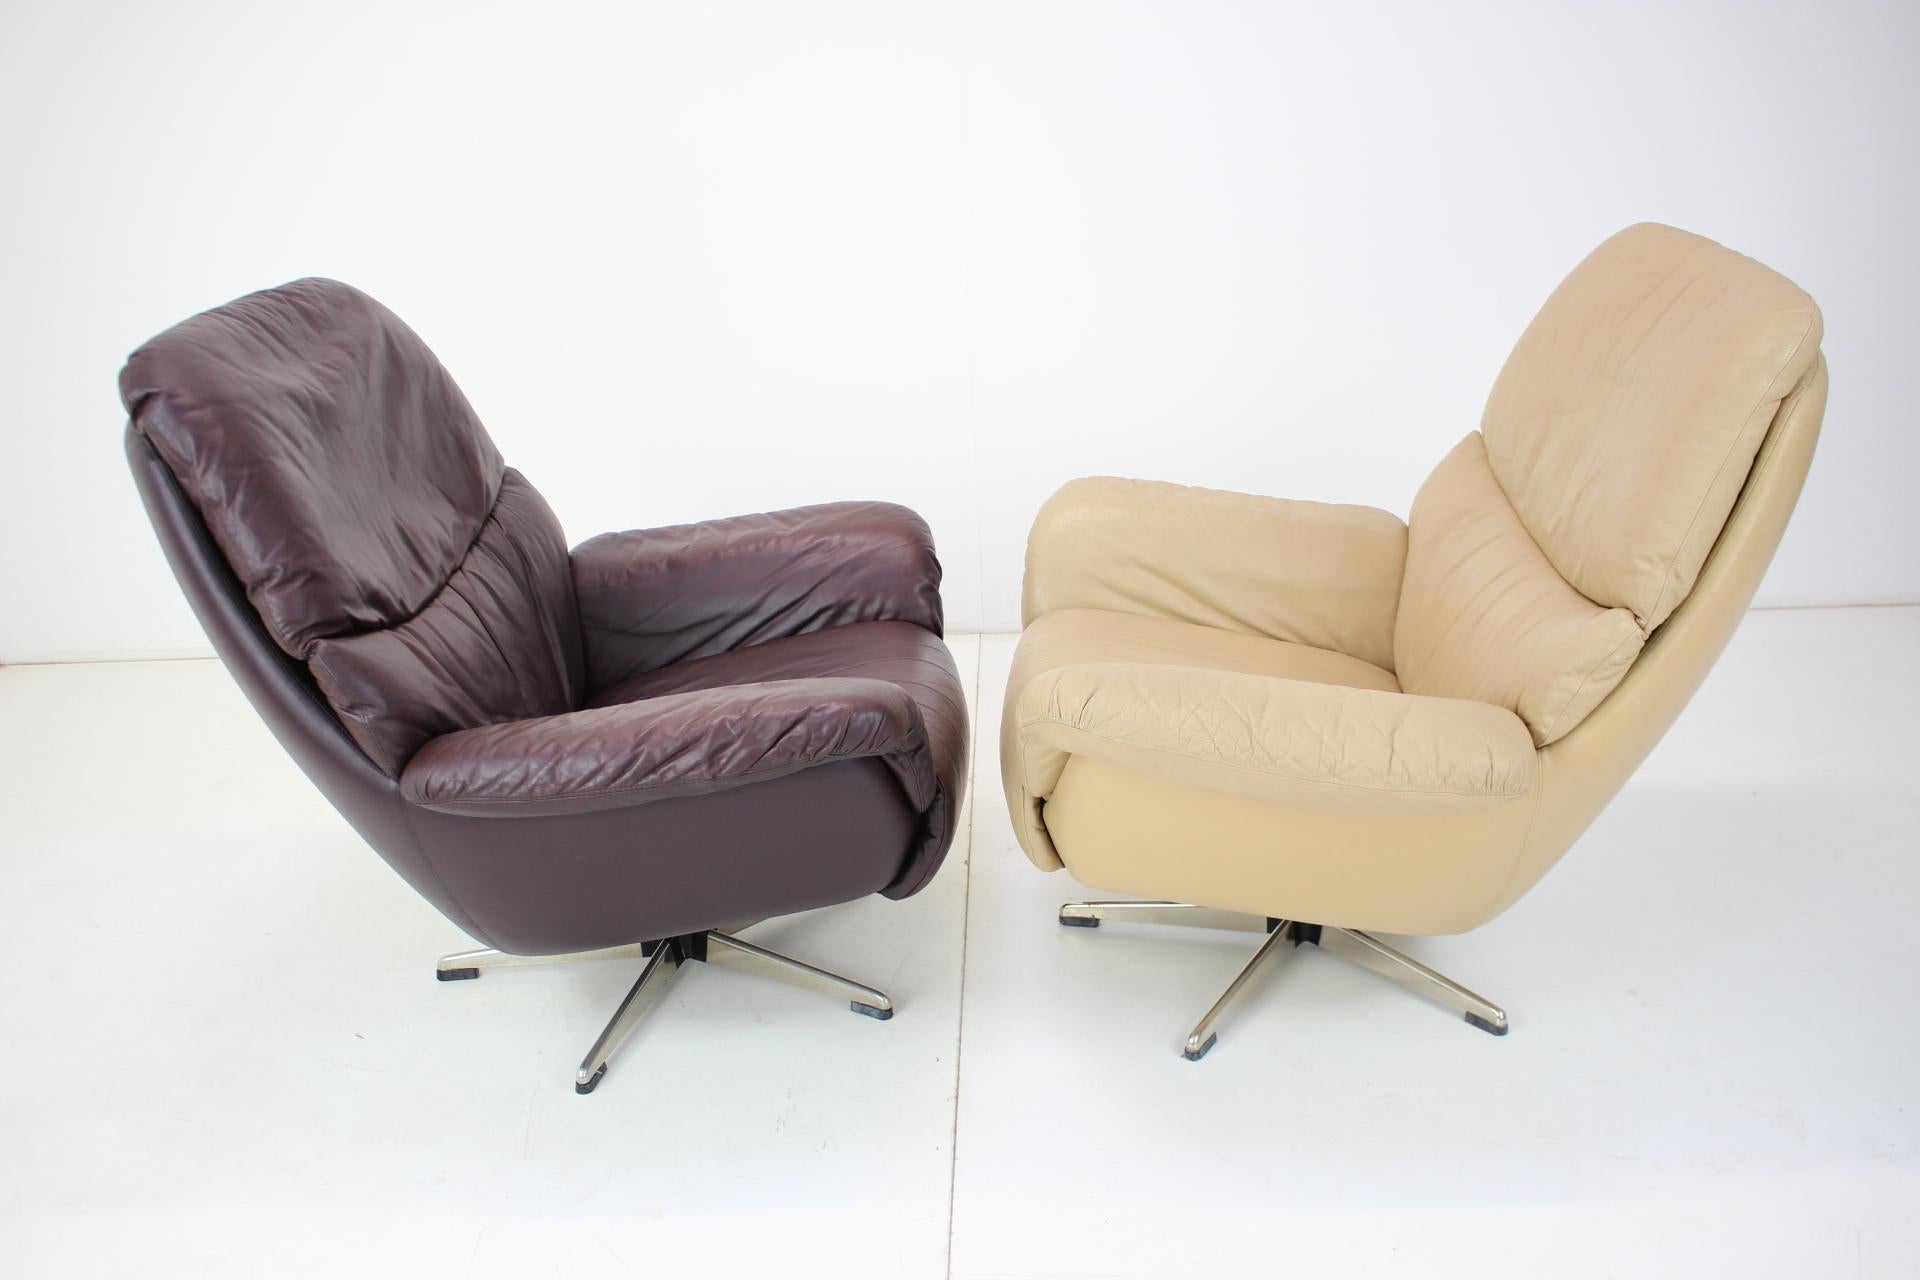 Late 20th Century Set of Two Scandinavian Adjustable Leather Armchairs by Peem, 1970s, Finland For Sale